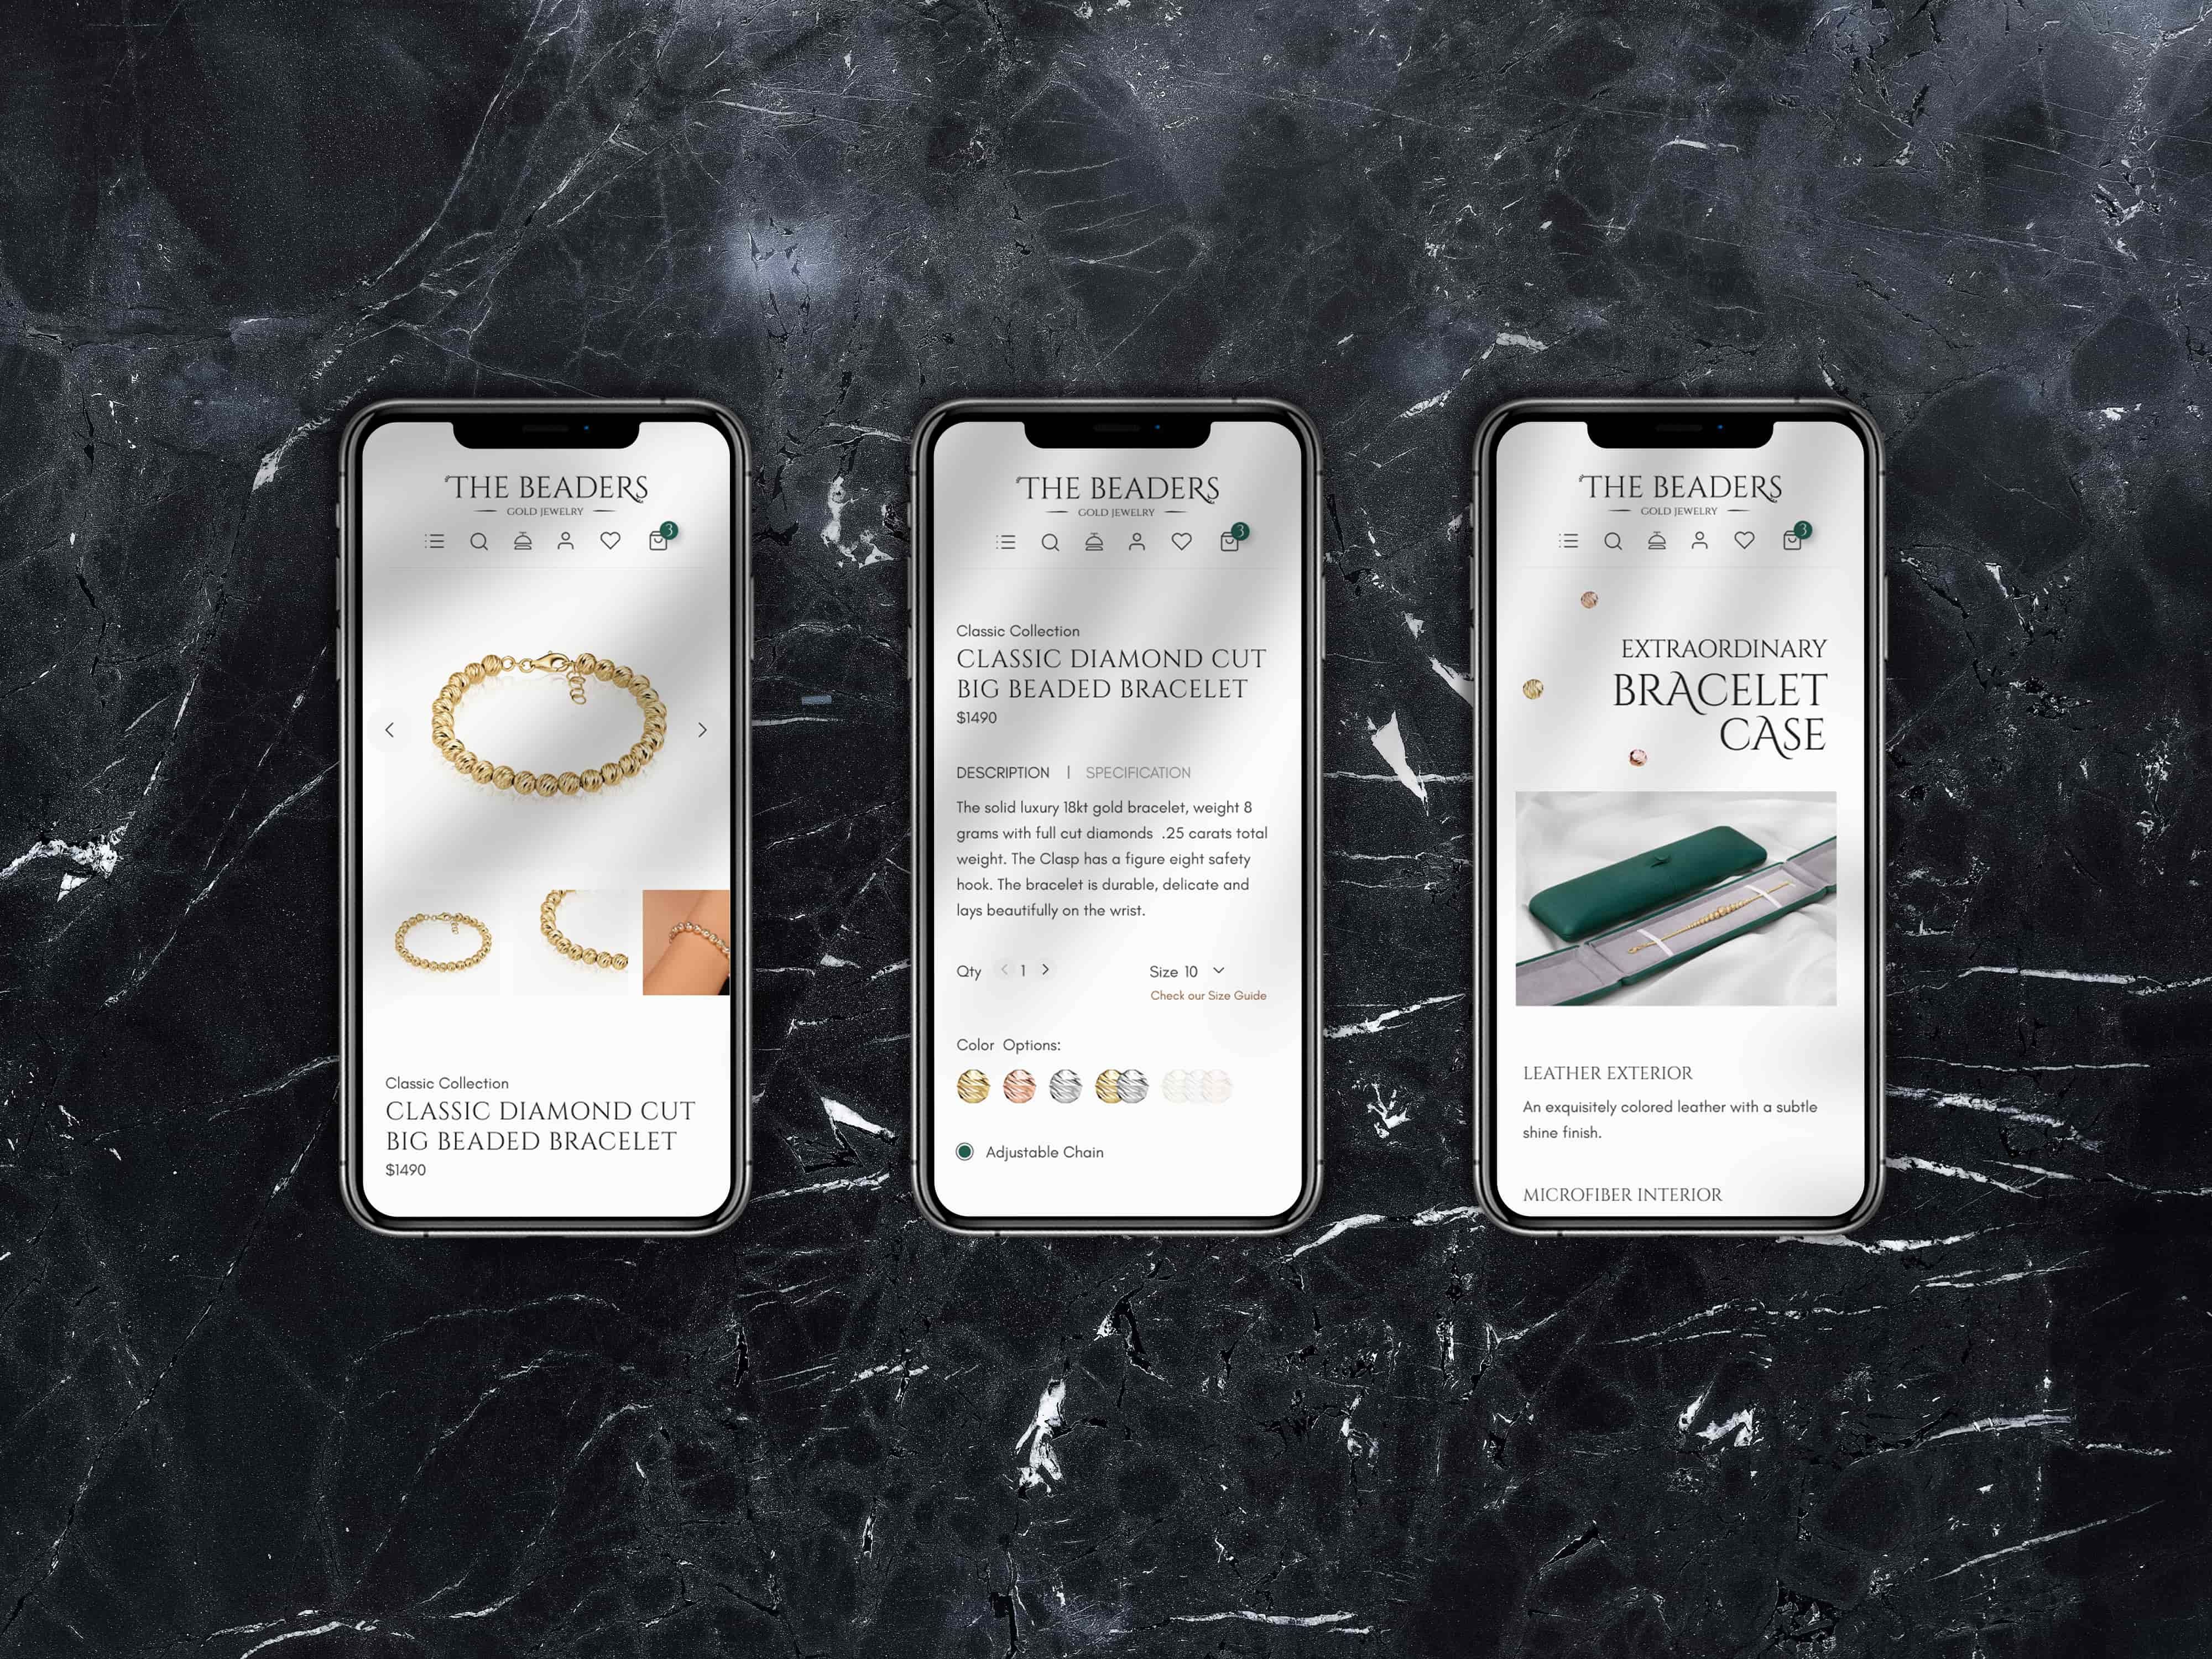 The Beaders - iphone view for few sections of the product page: product banner with  product images, product details and purchase options, extraordinary bracelet case